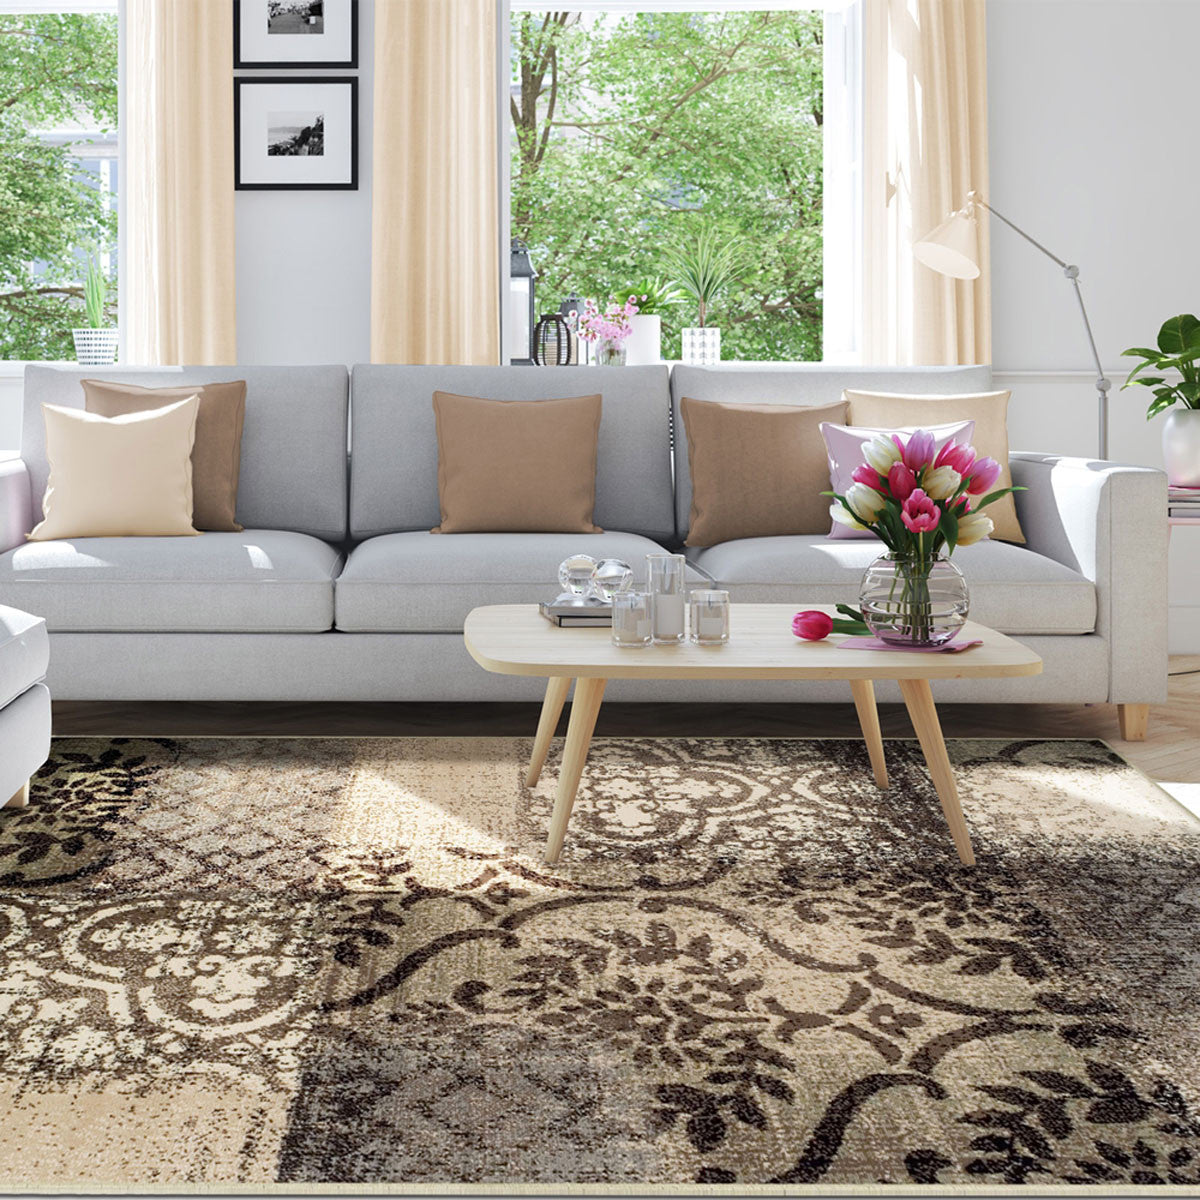 4' X 6' Tan And Brown Damask Distressed Stain Resistant Area Rug